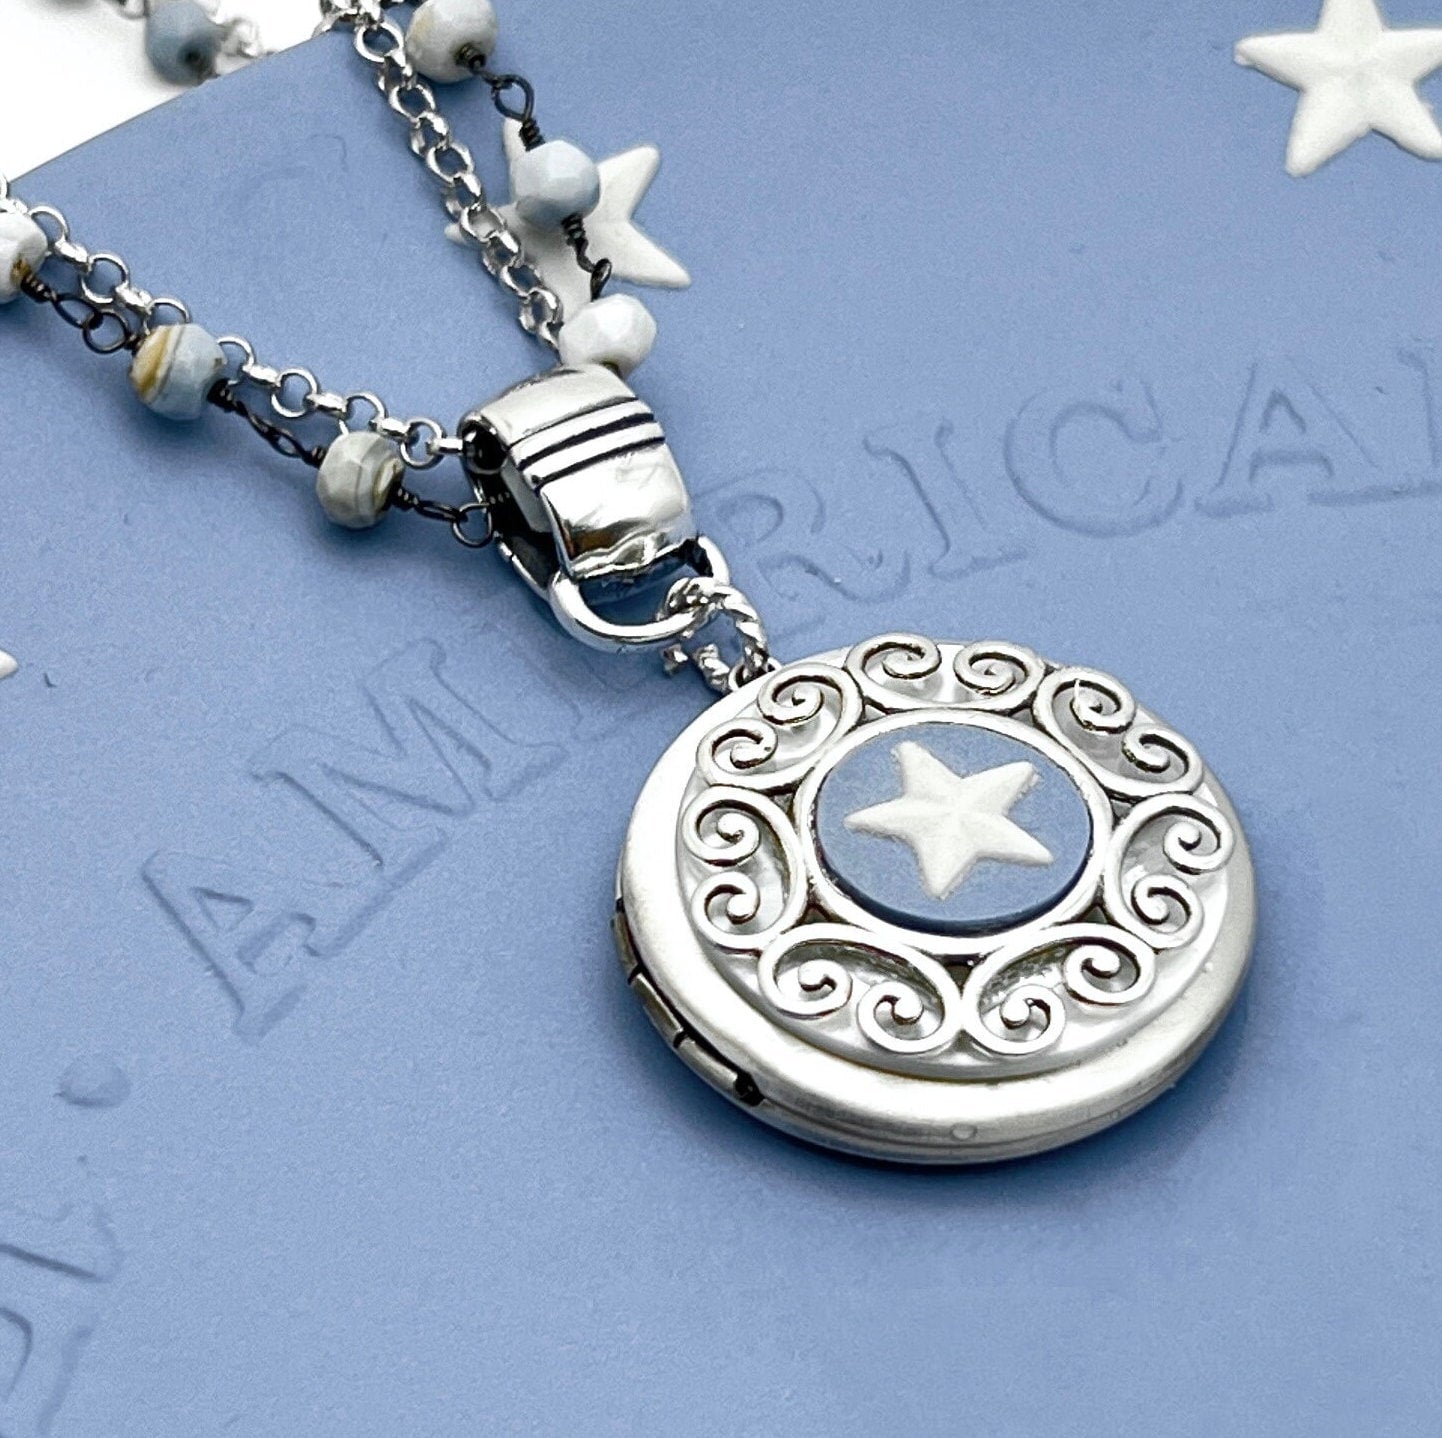 Sterling Silver Locket Necklace, Wedgwood Jasperware Broken China Jewelry, Blue Opal Star Necklace, Gifts for Women